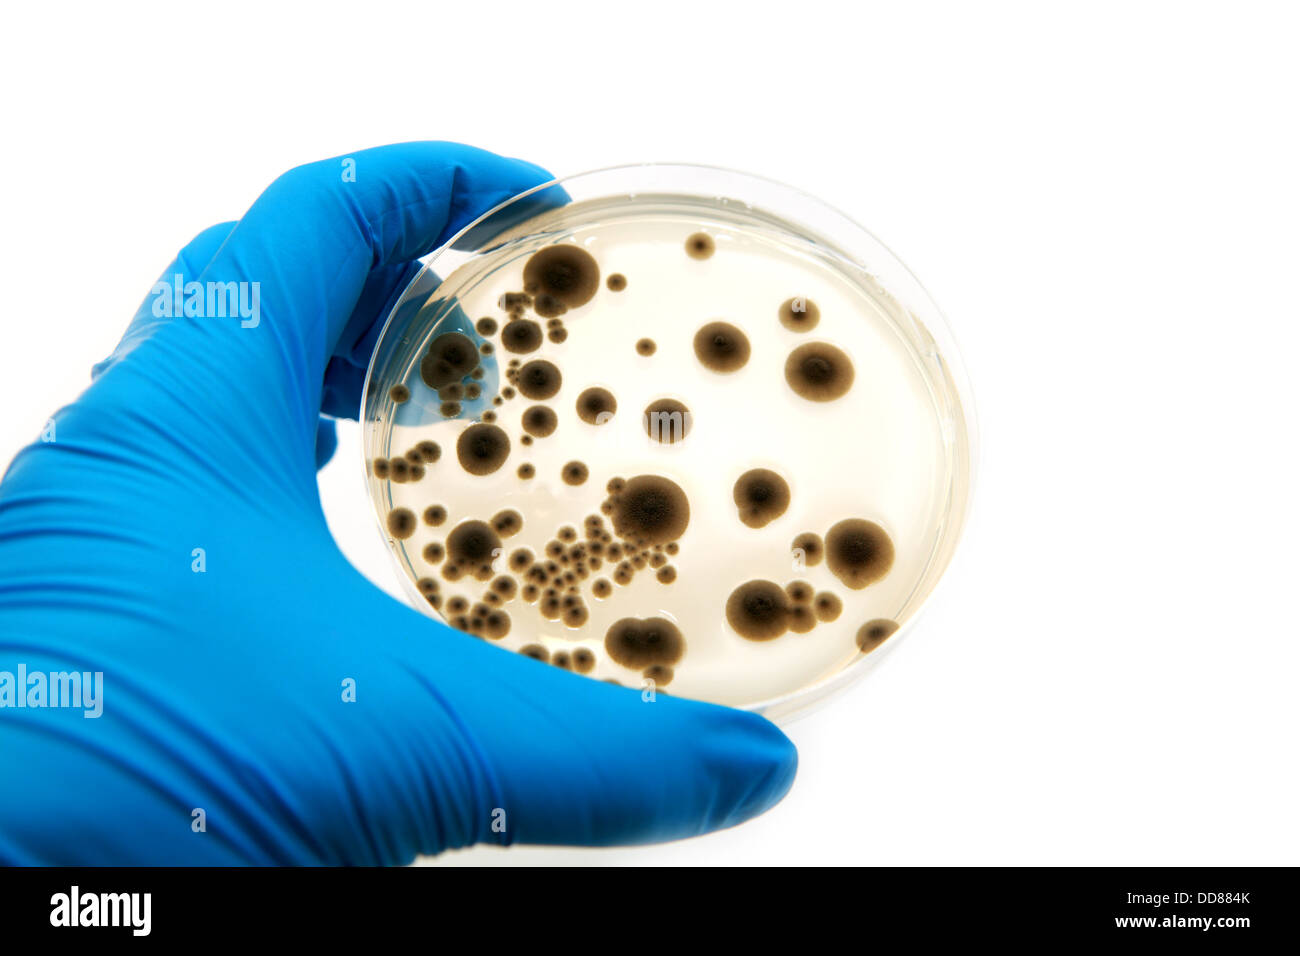 microbiological plate with fungi Stock Photo